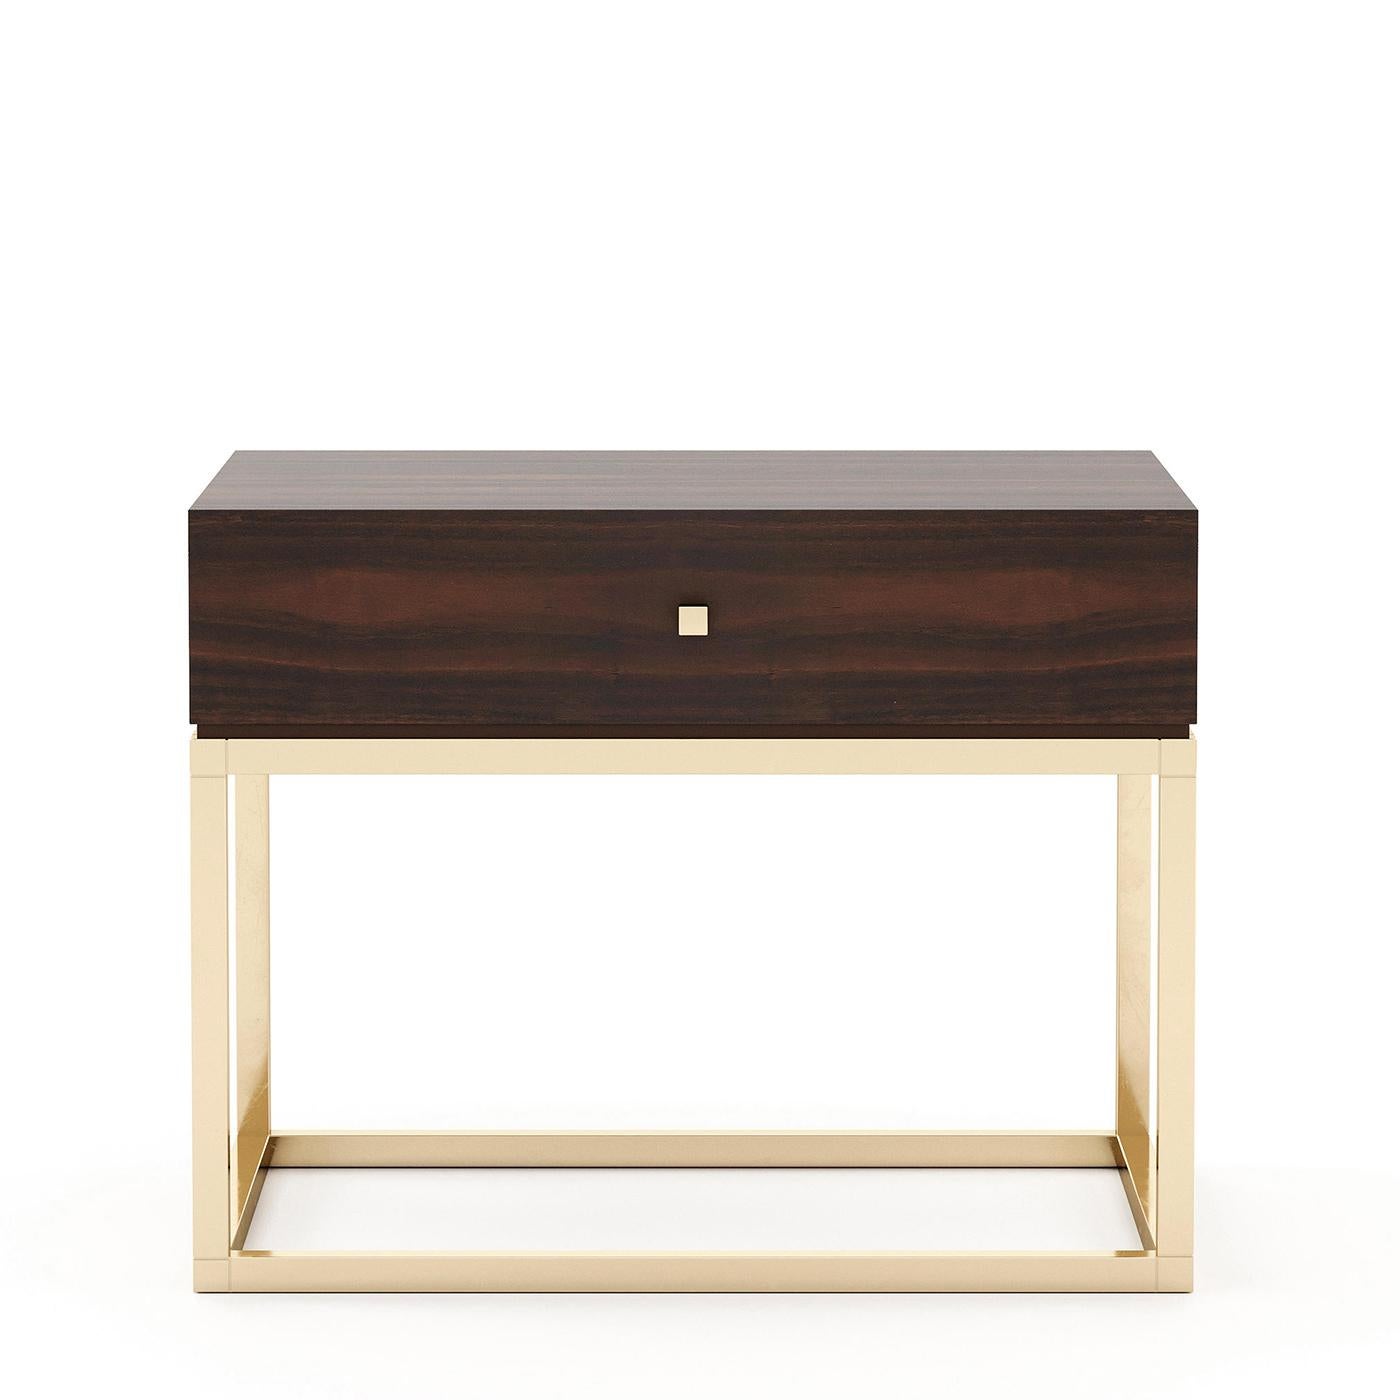 Side table tanka with structure in smocked eucalyptus wood in 
matte finish, with 2 drawers with easy glide system. With base
in polished stainless steel in gold finish.
Also available in ebony matte finish, or grey oak matte finish,
or natural